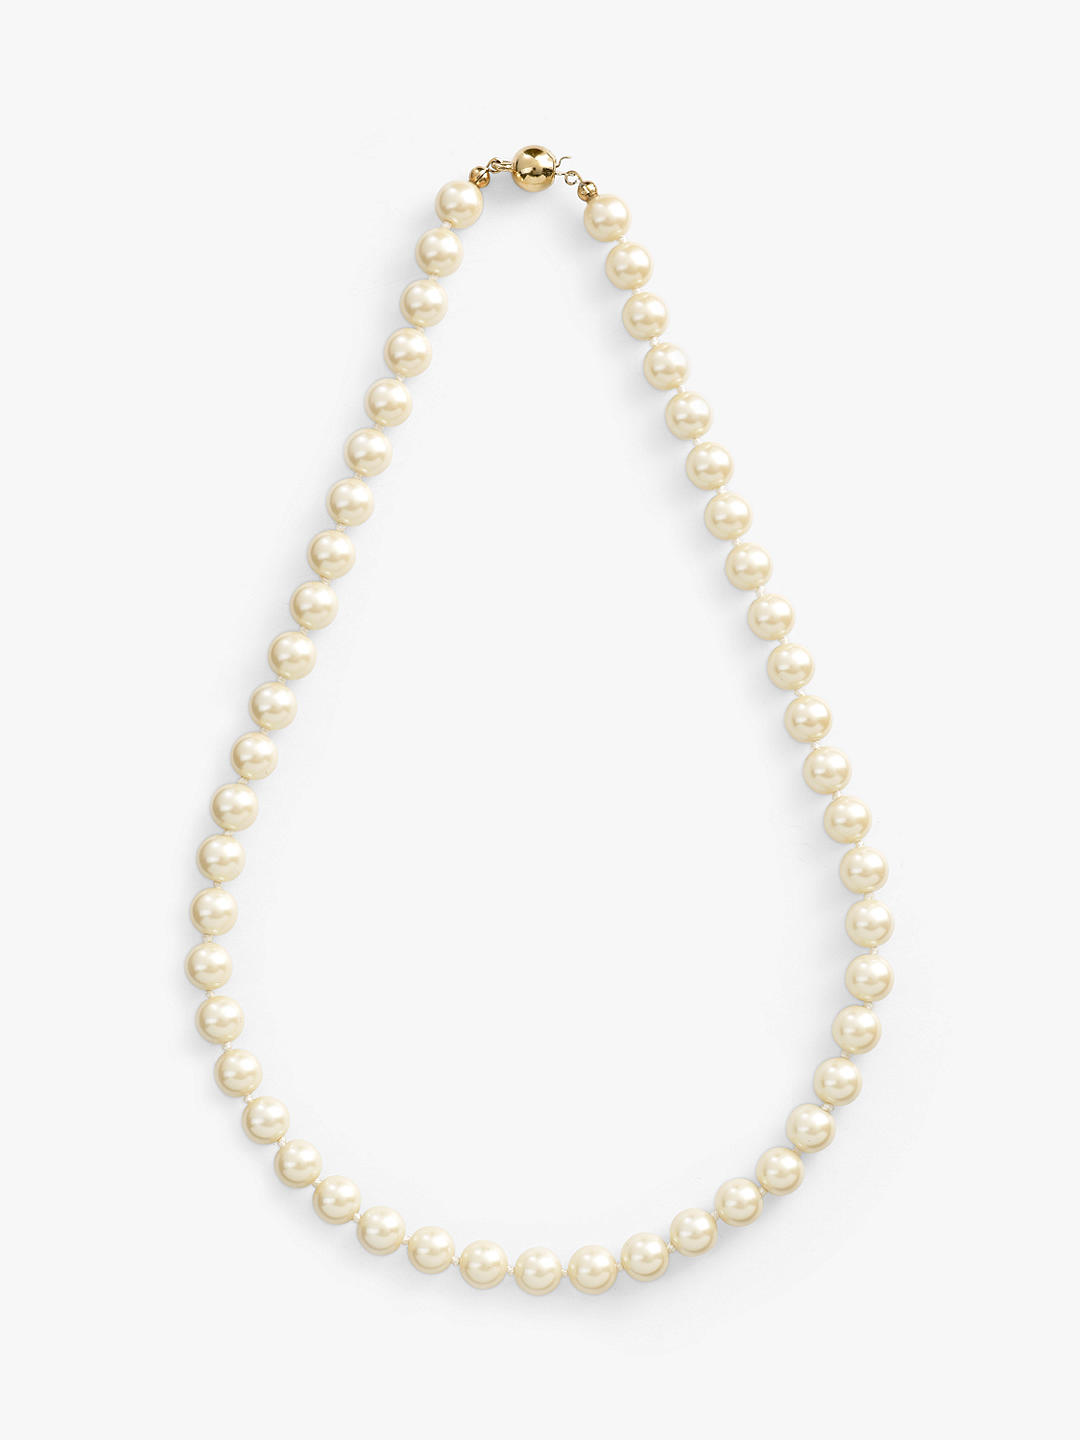 Eclectica Vintage Single Row Faux Pearl Necklace, Cream/Gold